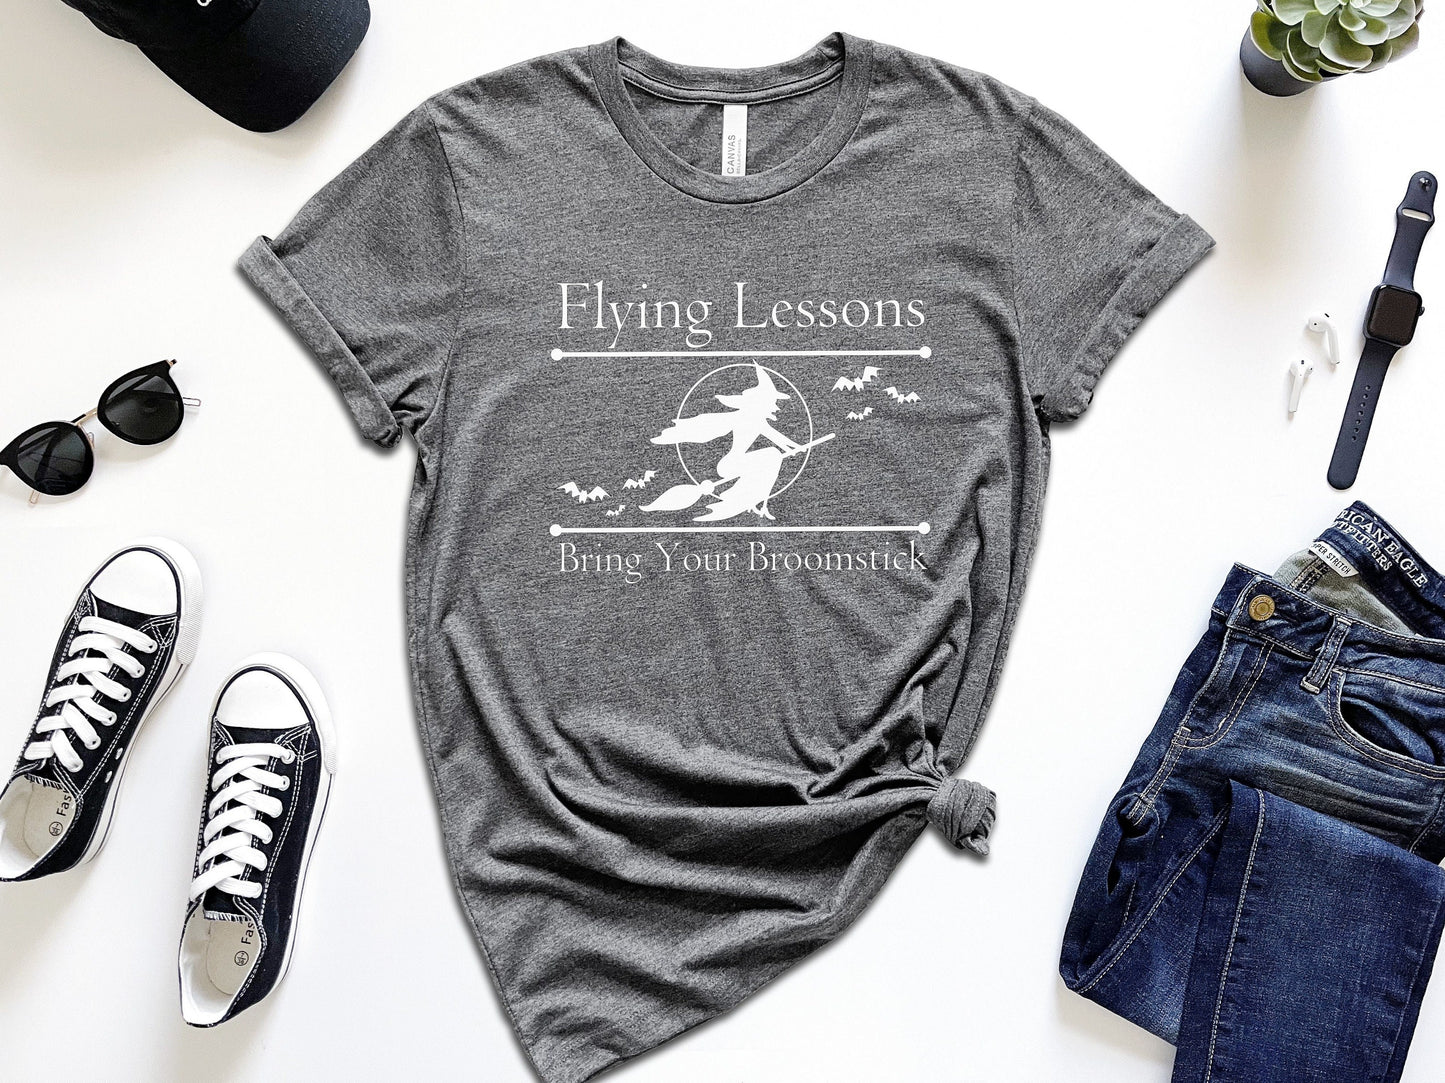 Flying Lessons: Bring Your Broomstick